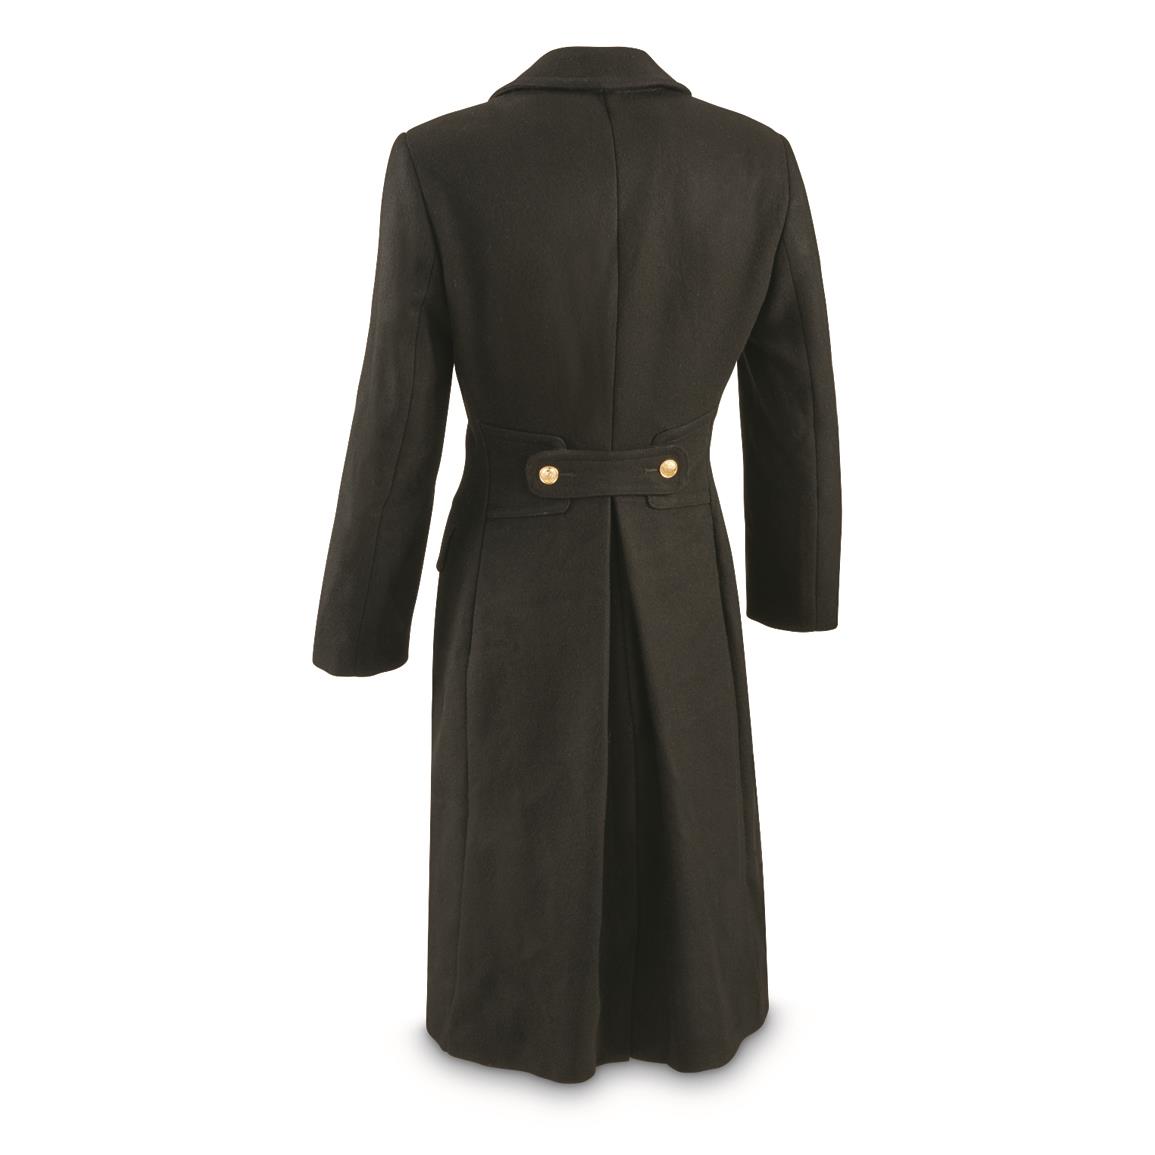 Russian Military Surplus Wool Trench Coat, Like New - 689662 ...